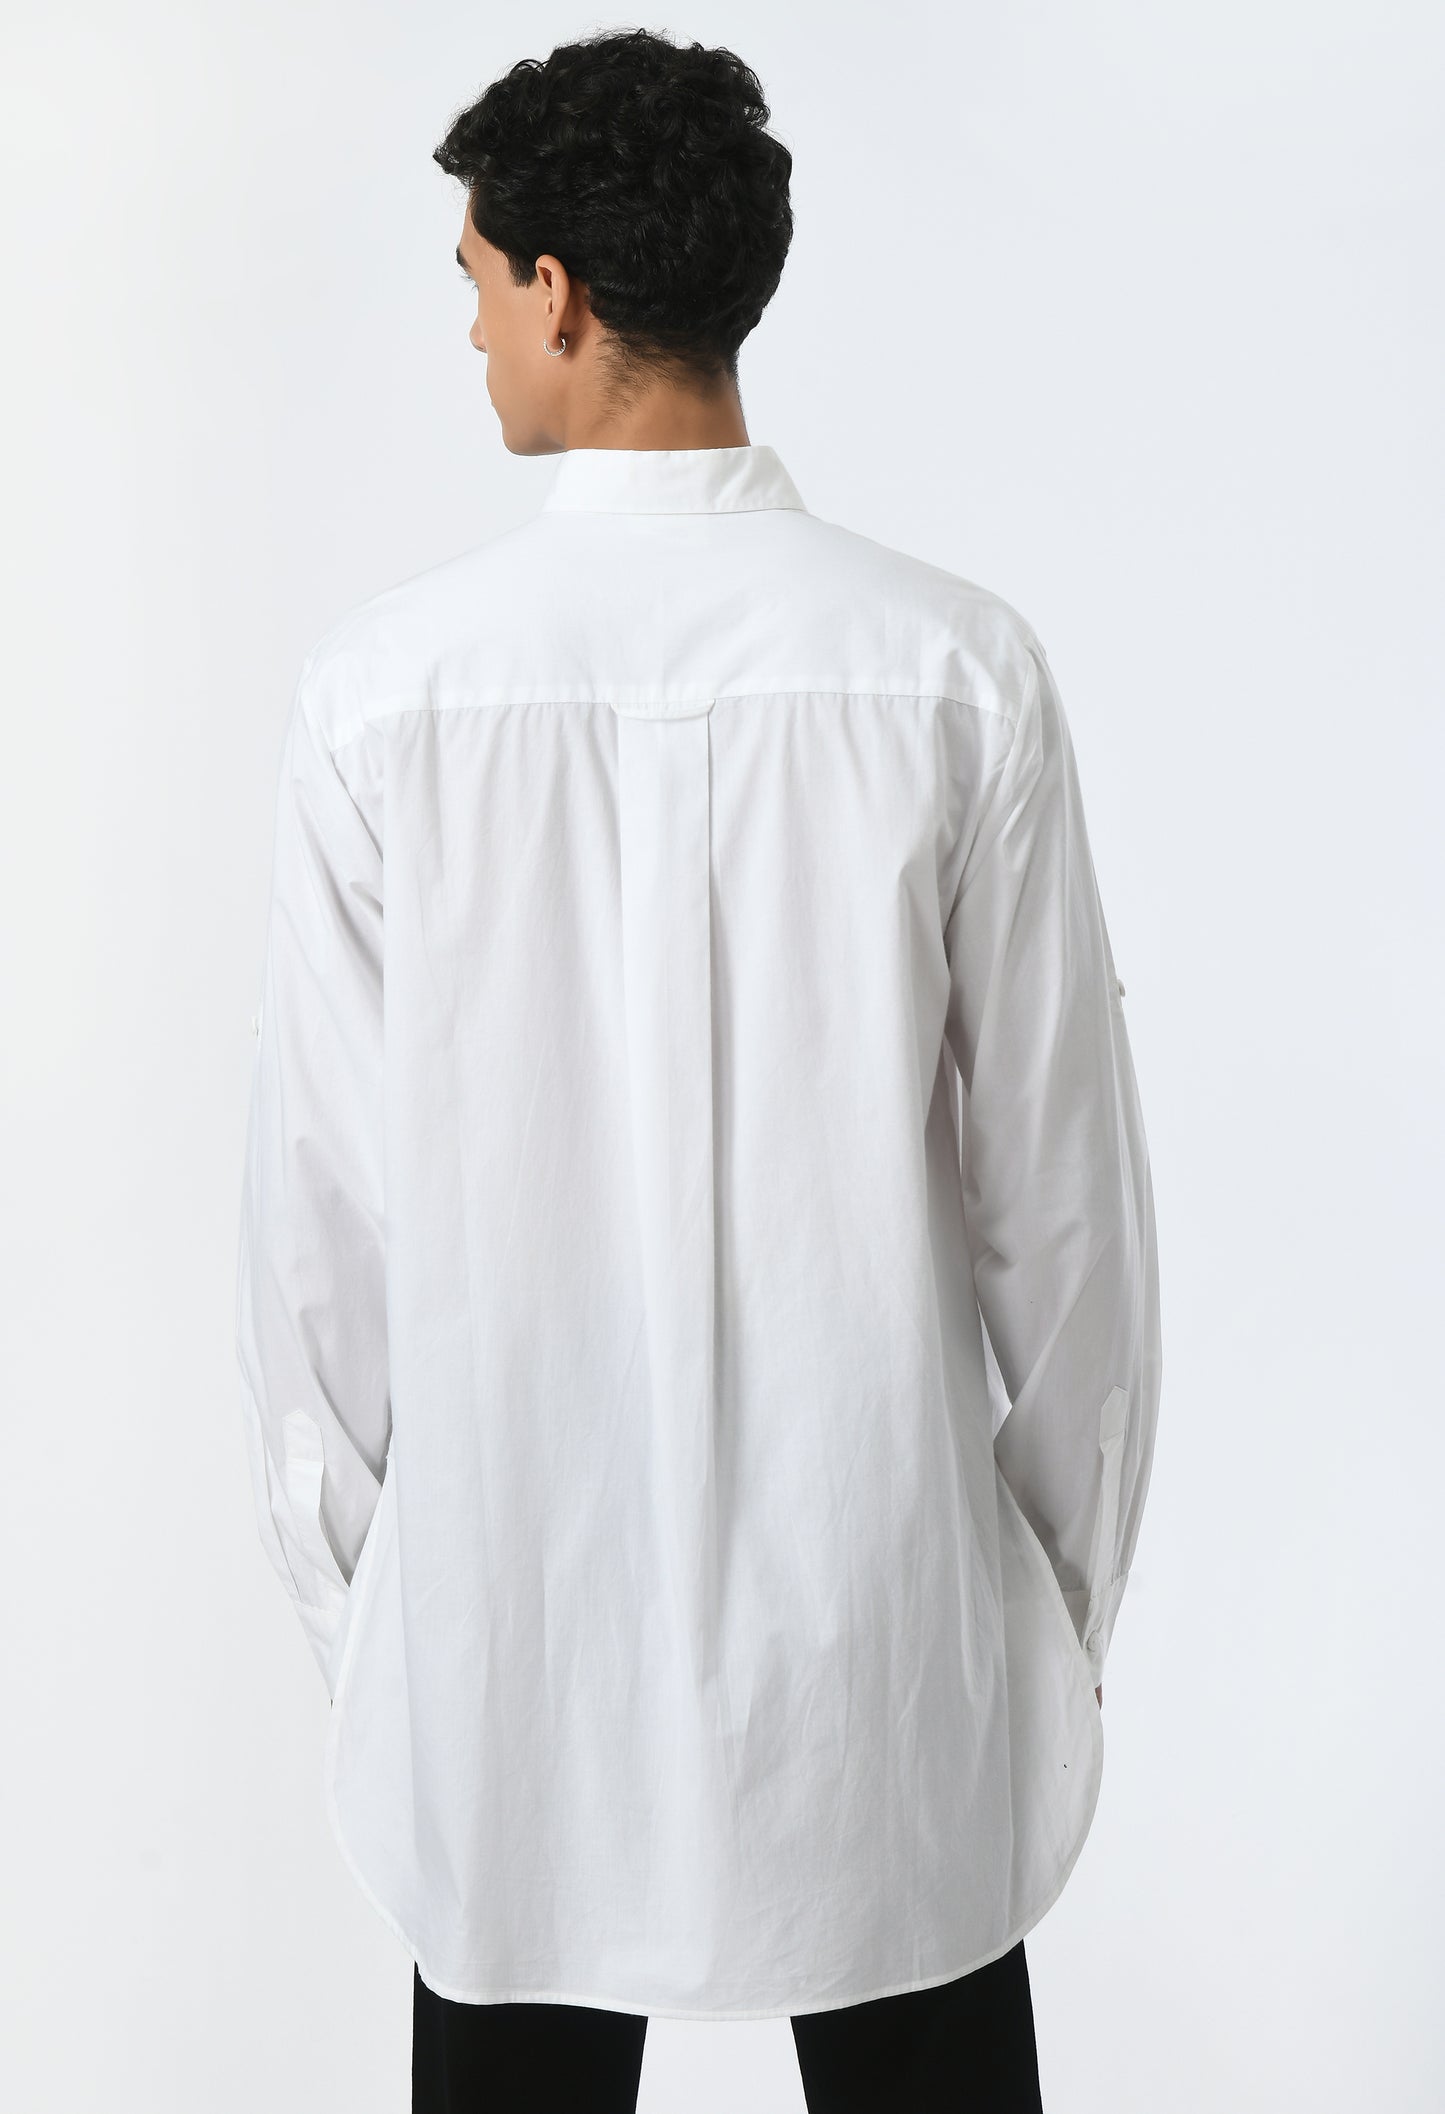 White unisex cotton shirt with classic collar.